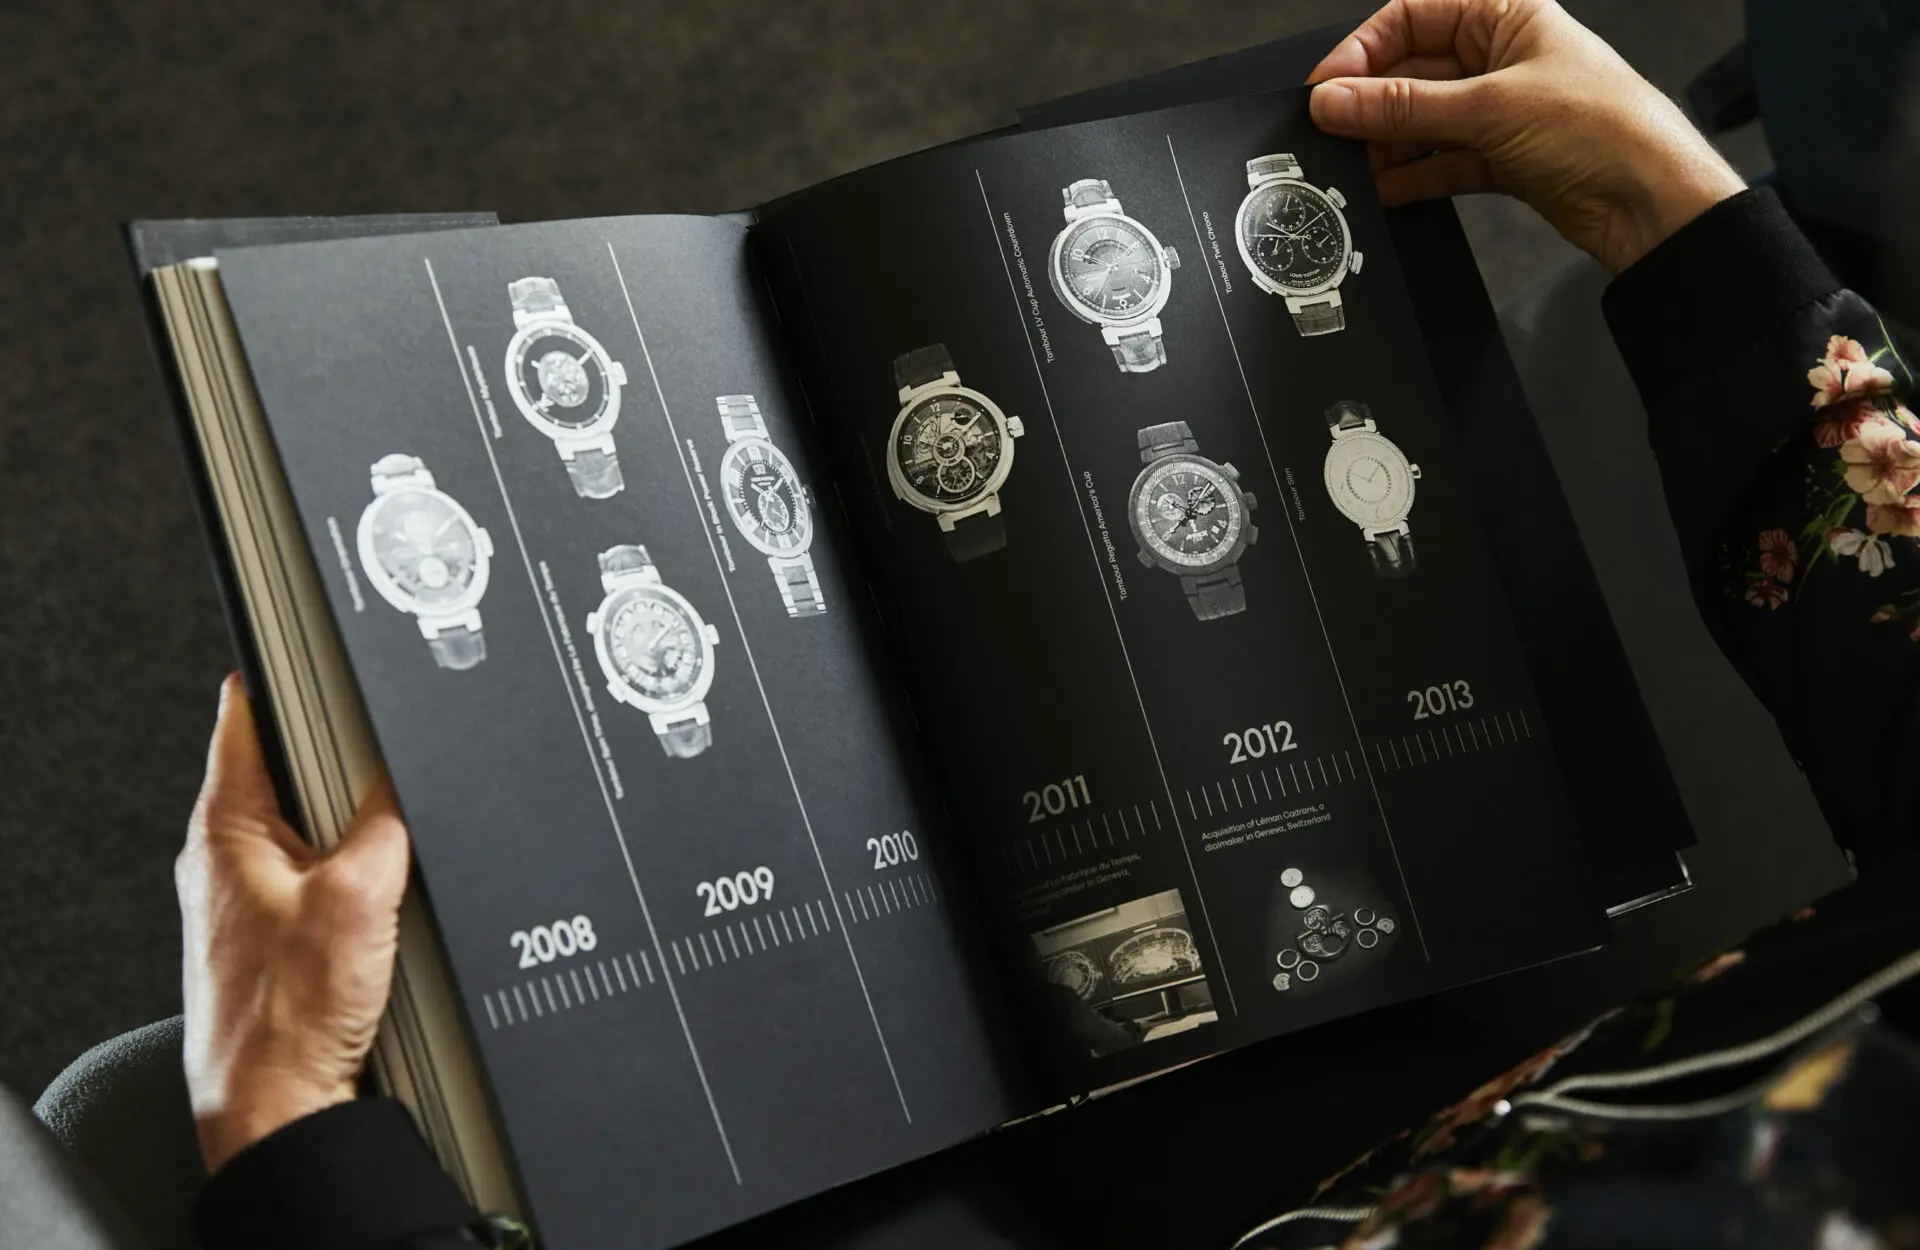 Louis Vuitton Tambour, English Version - Art of Living - Books and